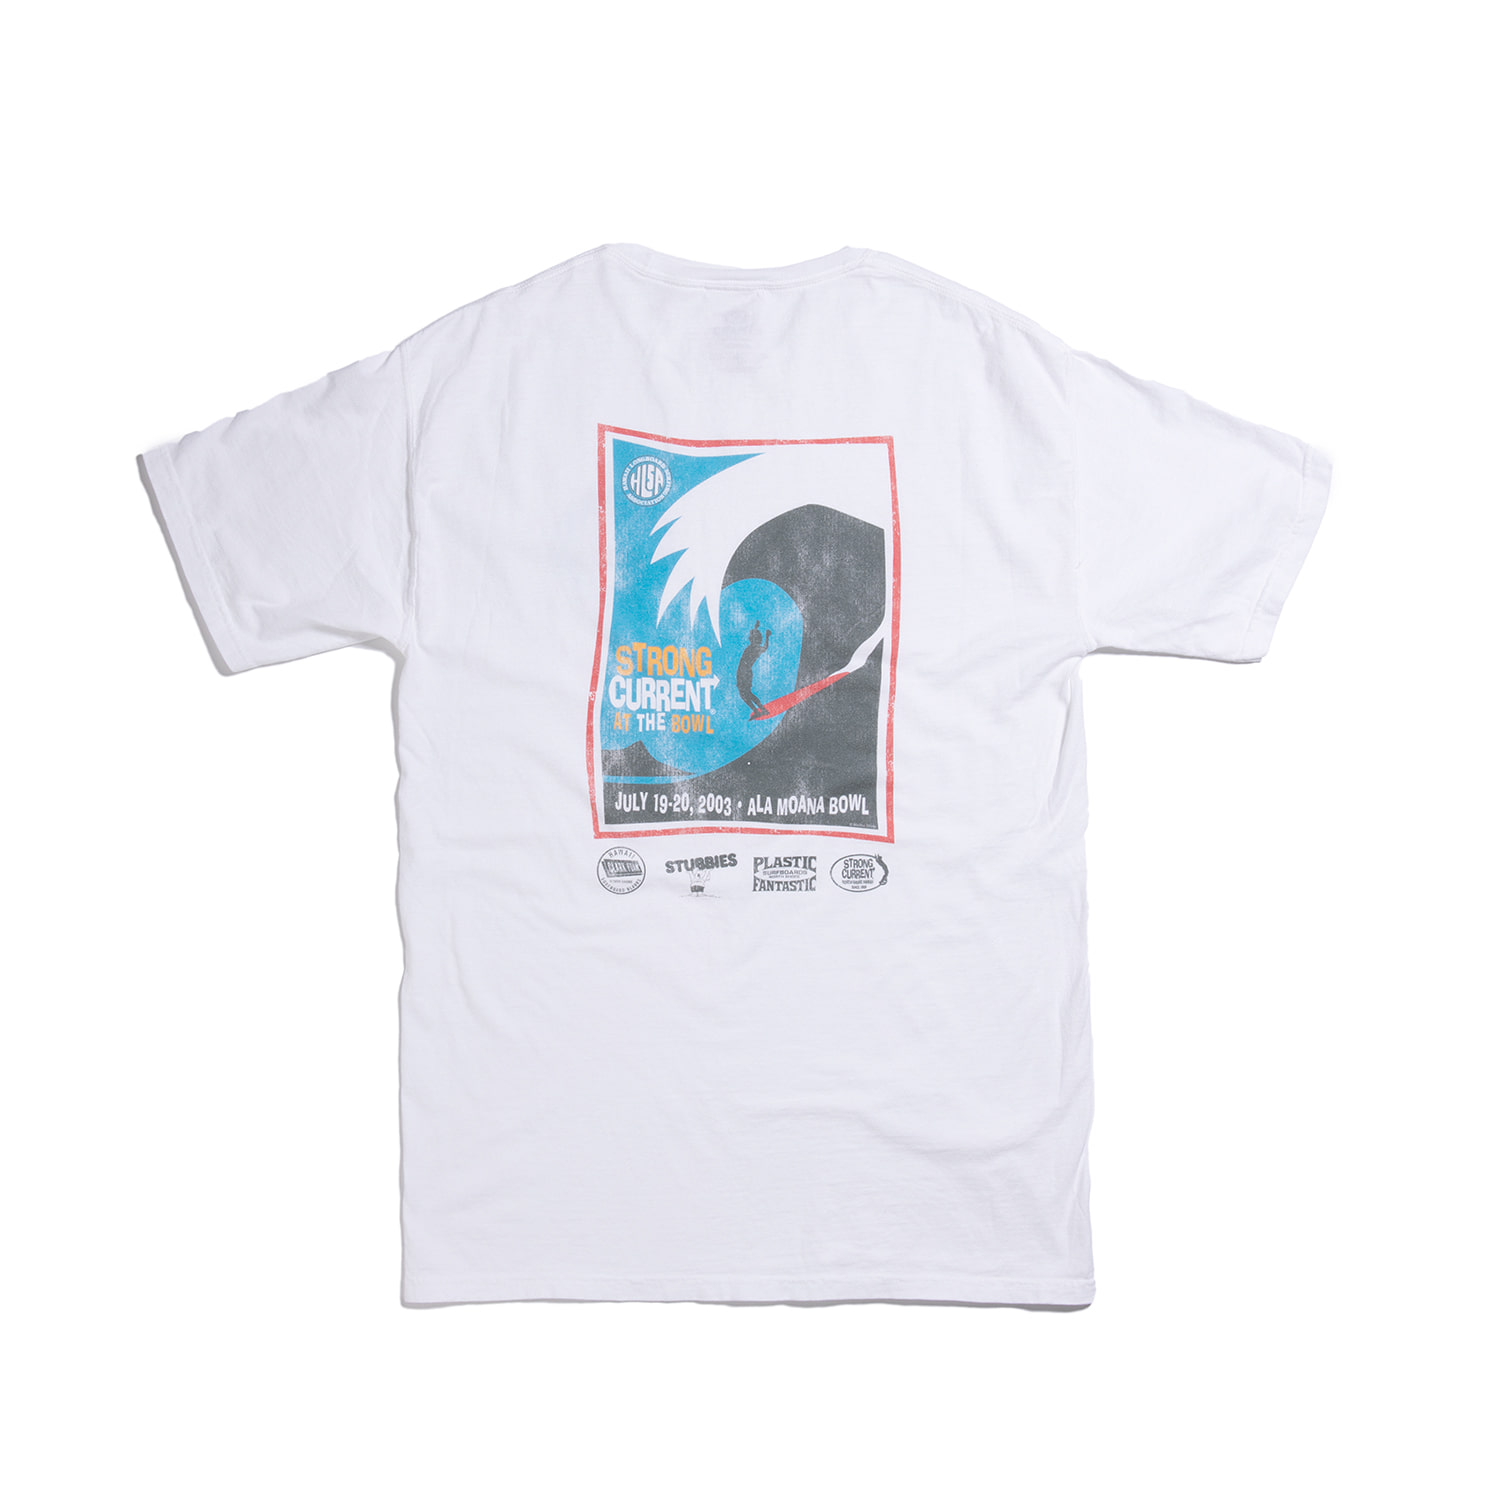 At The Bowl Surf Contest Tee